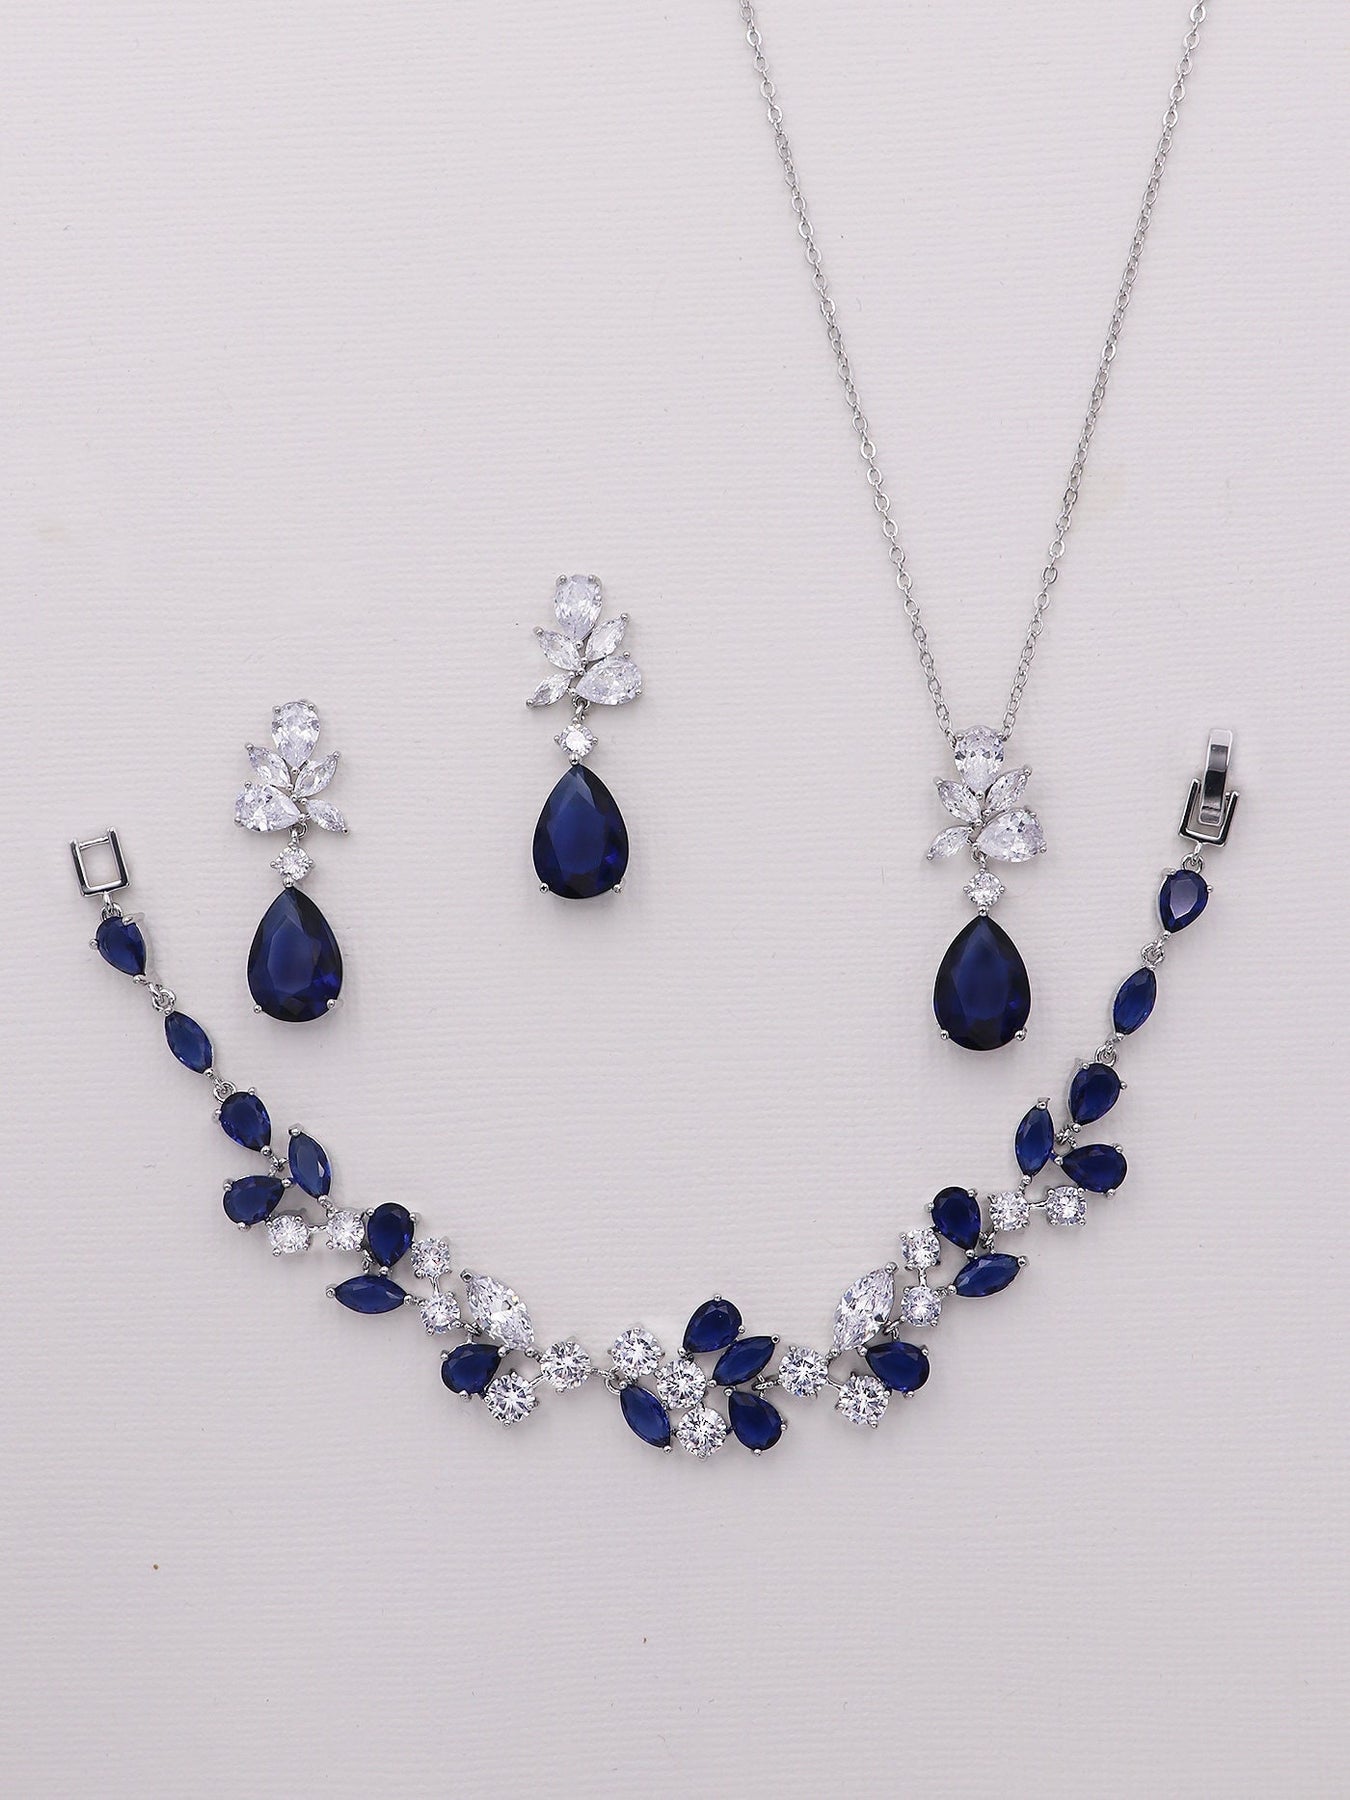 simulated blue sapphire charm necklace and earrings set with cubic zirconia  | eBay